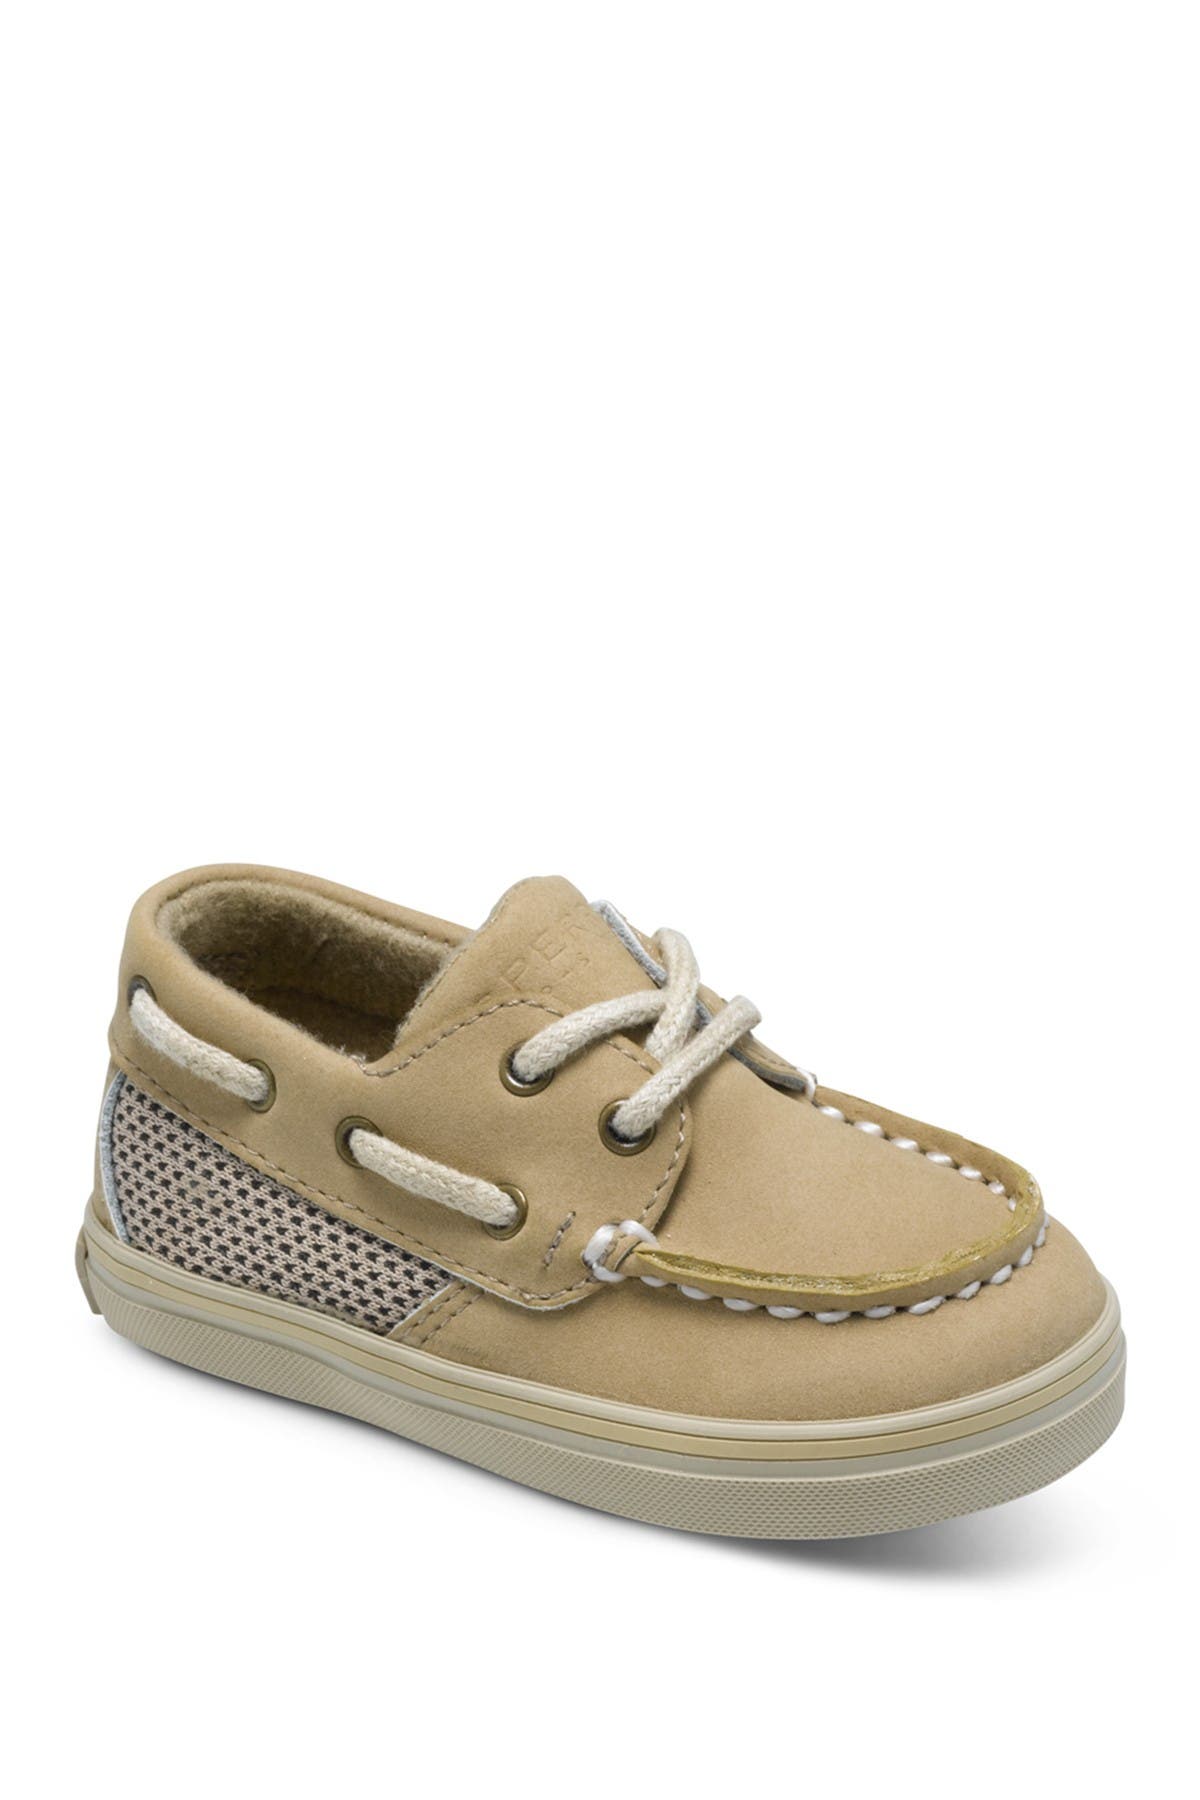 boys clearance sneakers